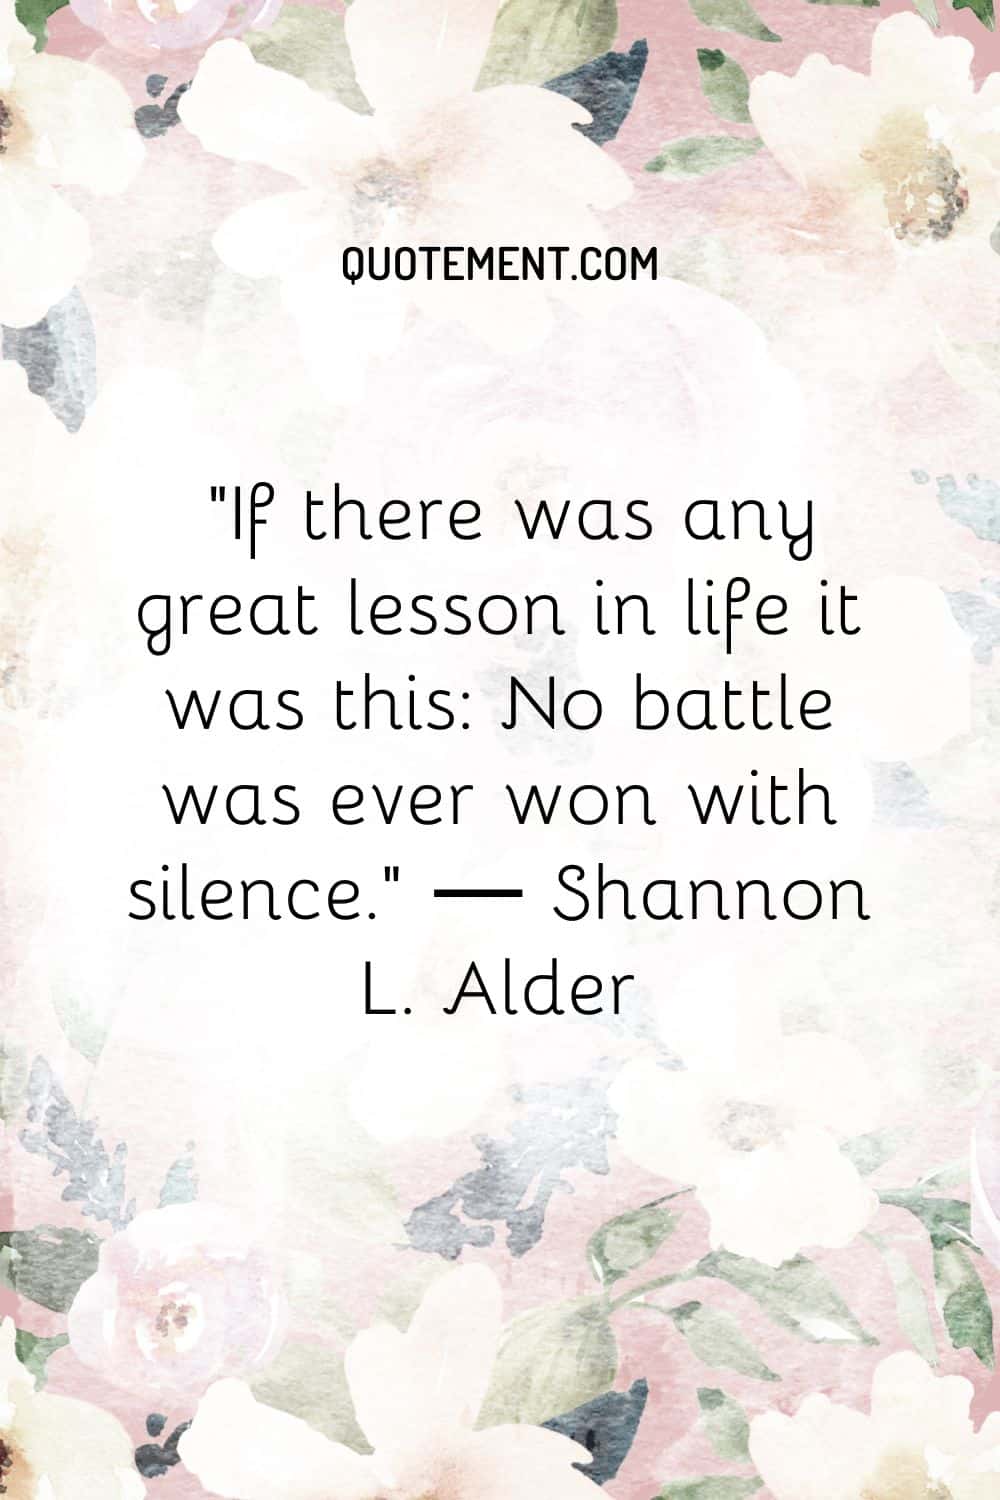 If there was any great lesson in life it was this No battle was ever won with silence